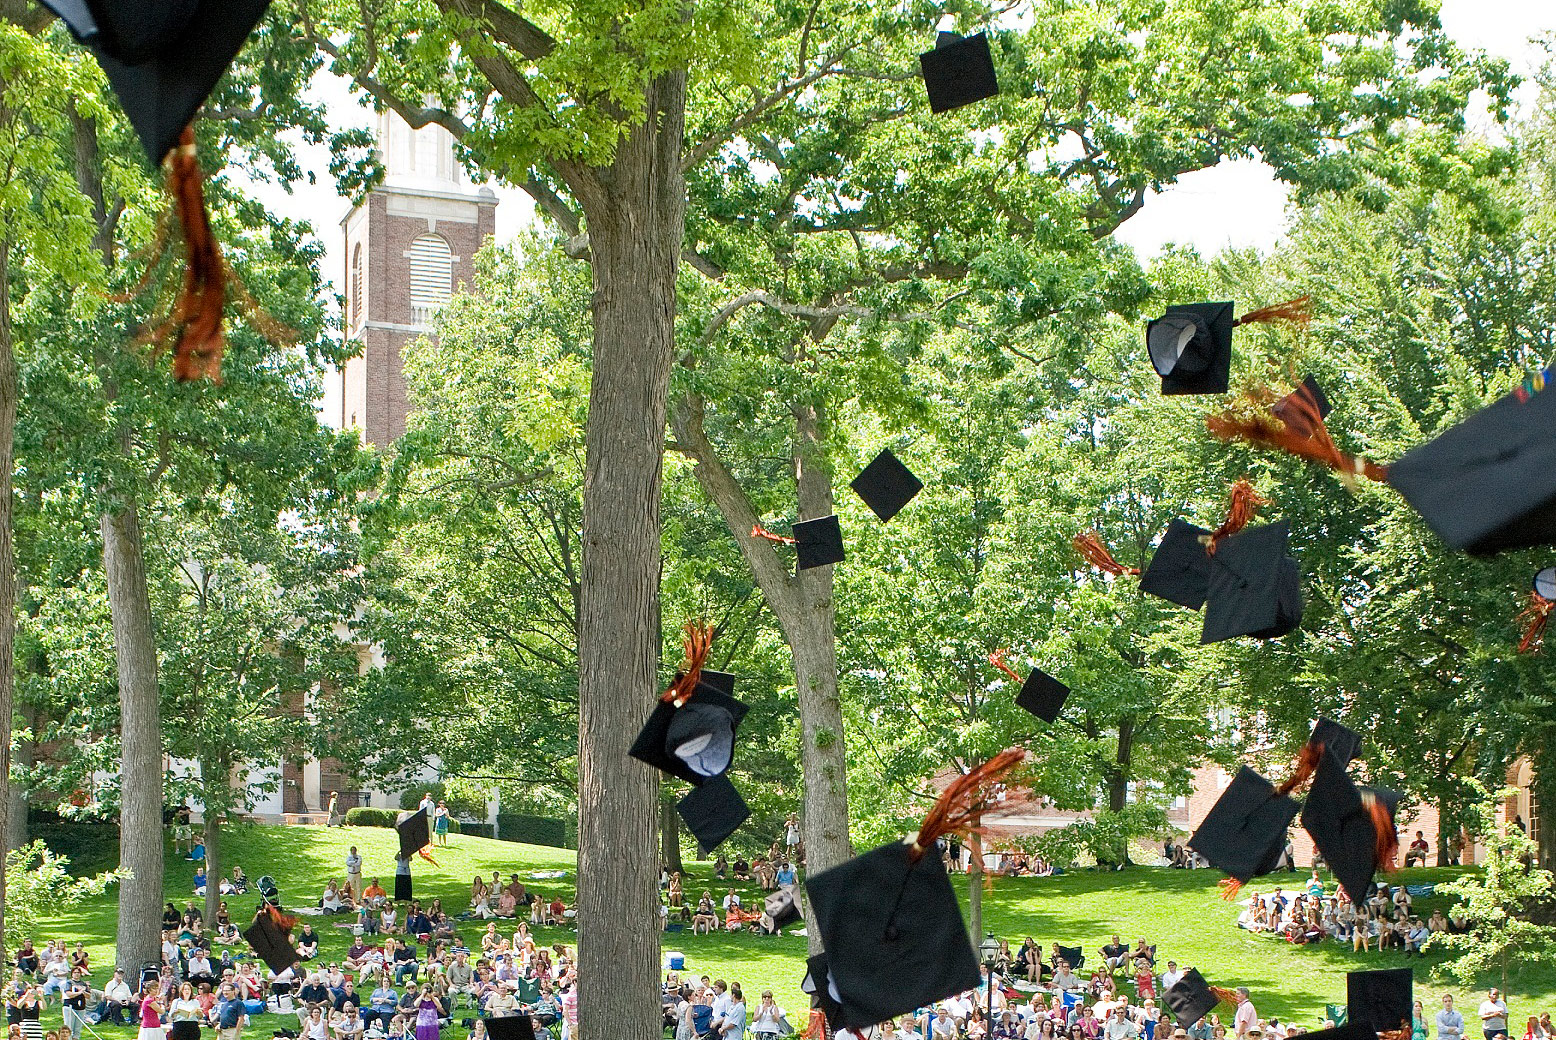 Kalamazoo College Commencement is June 12 at 1 p.m.